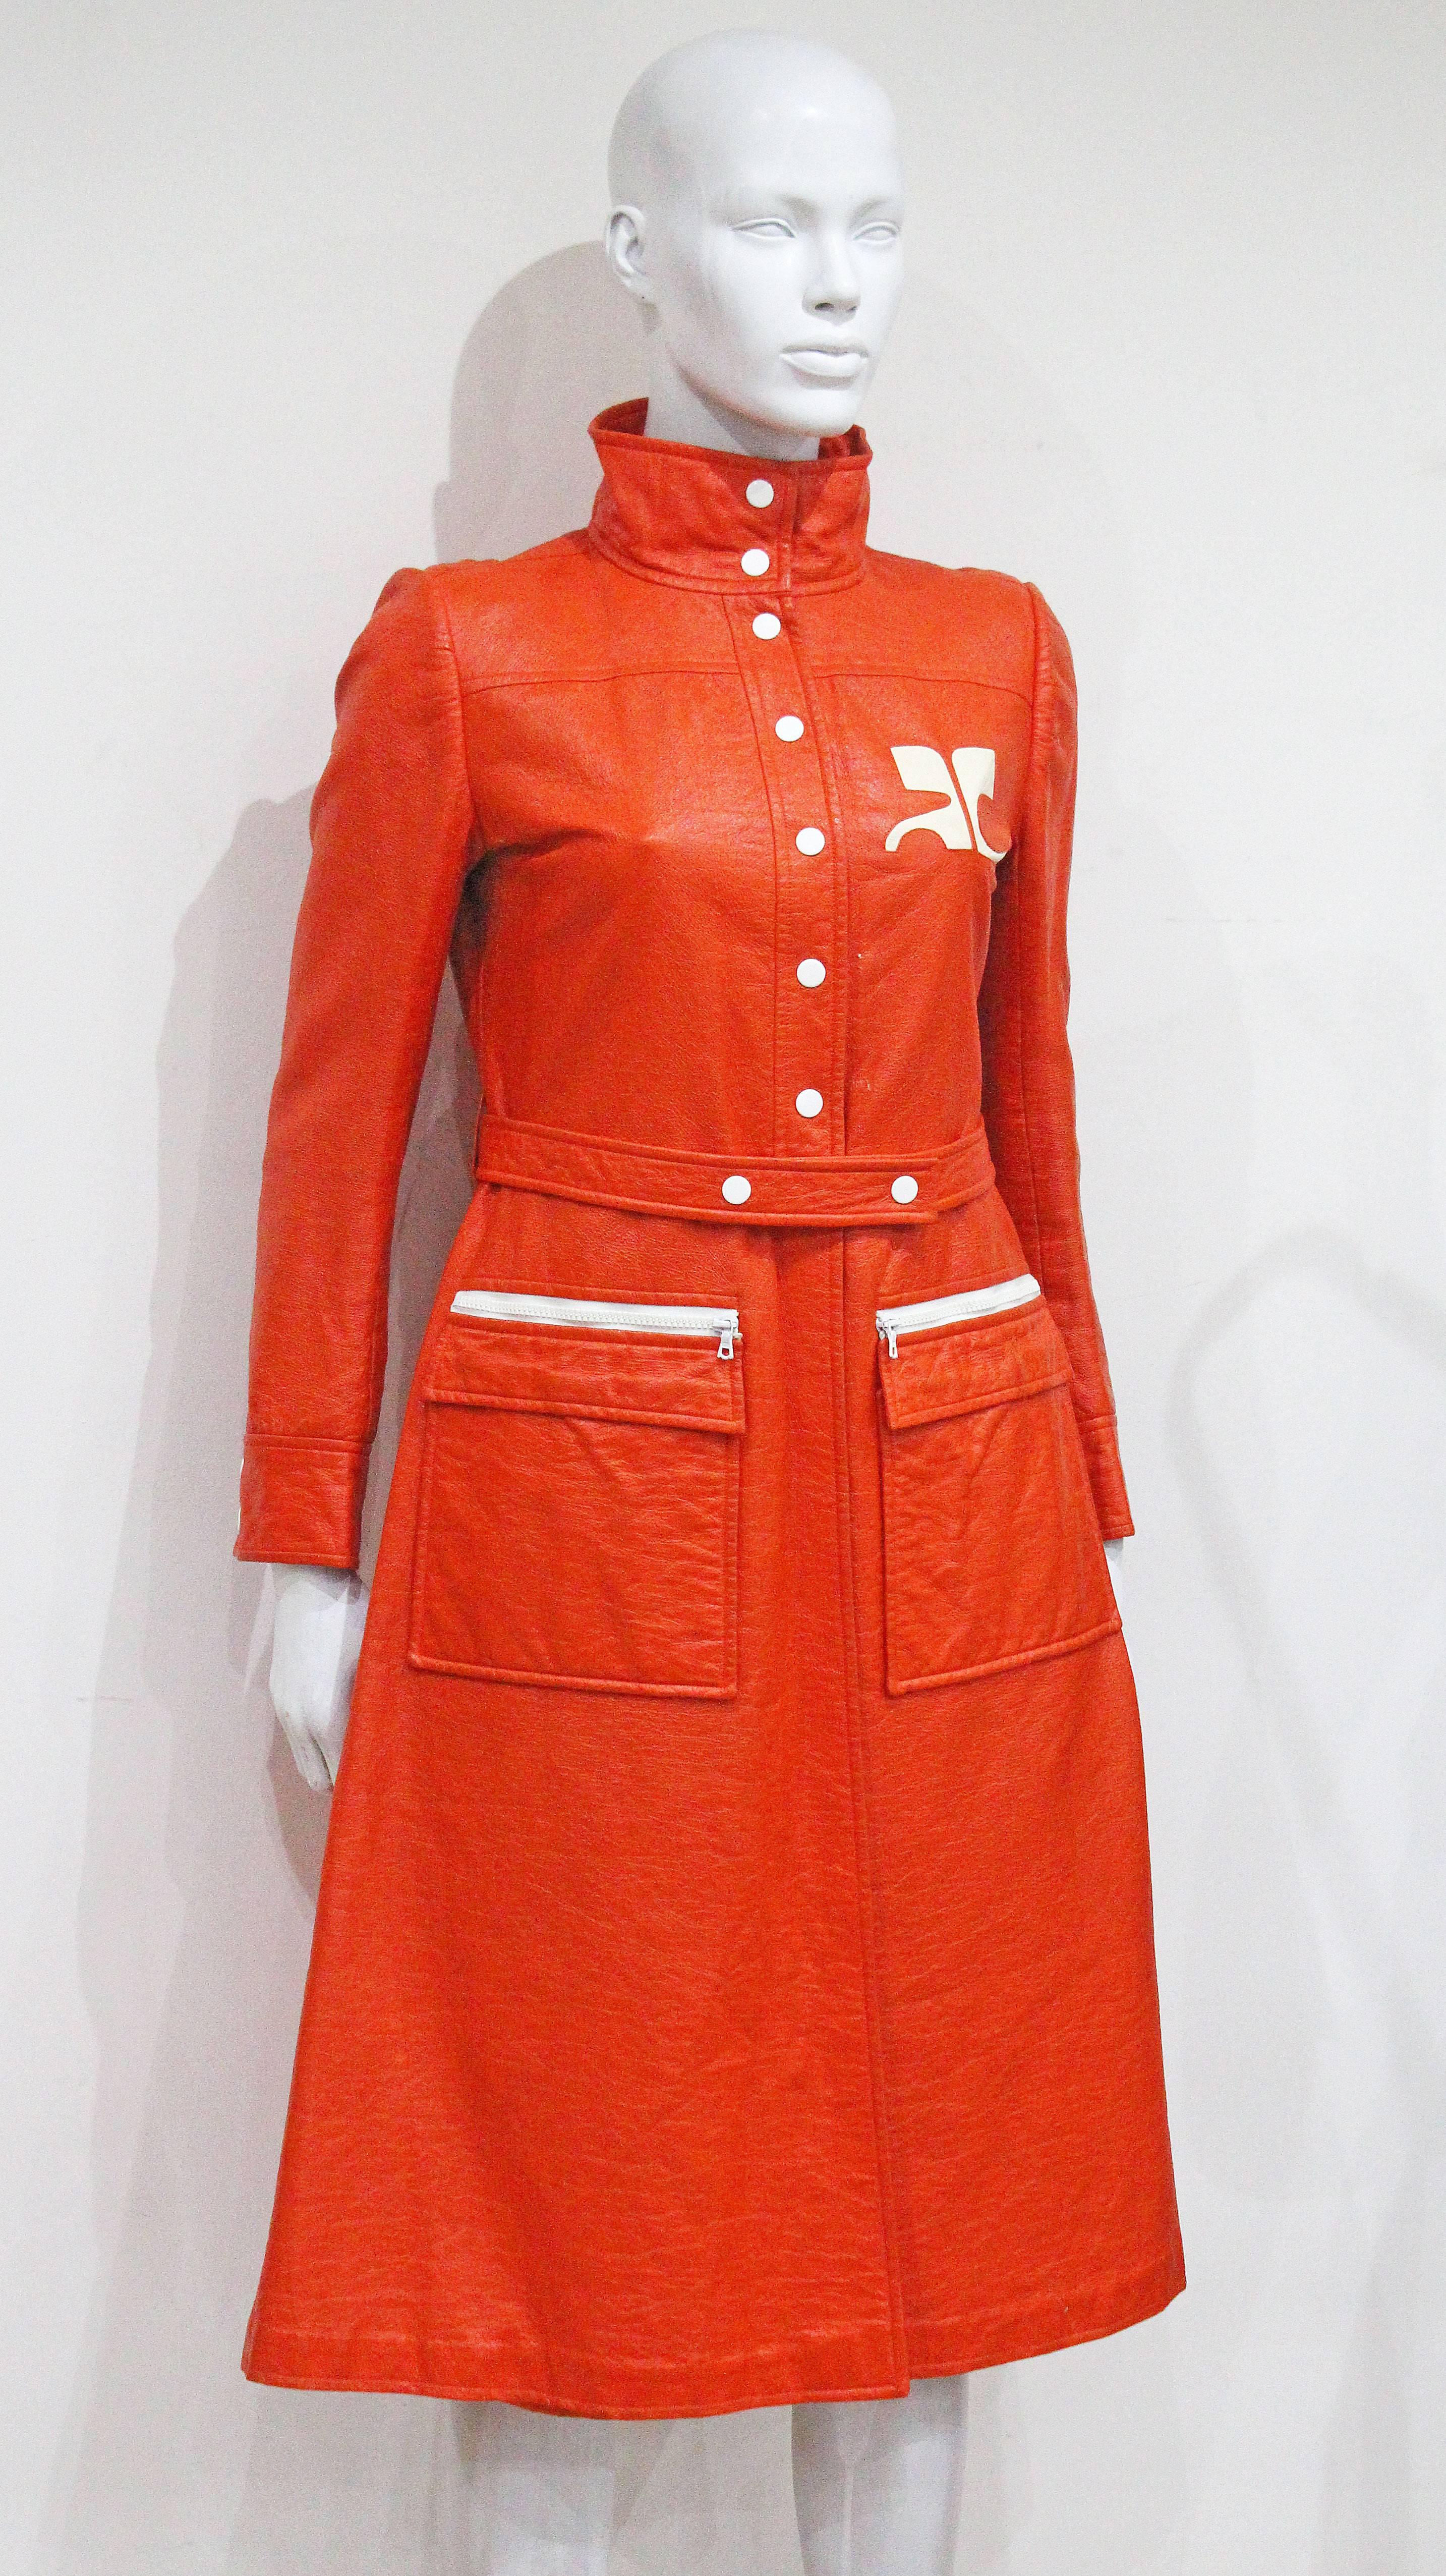 A Courreges coat dress from the year 1970 in orange vinyl fabric. The coat dress features stand collar, matching belt; white dot-button at centre-front and large Courreges logo on left breast. 

S/M